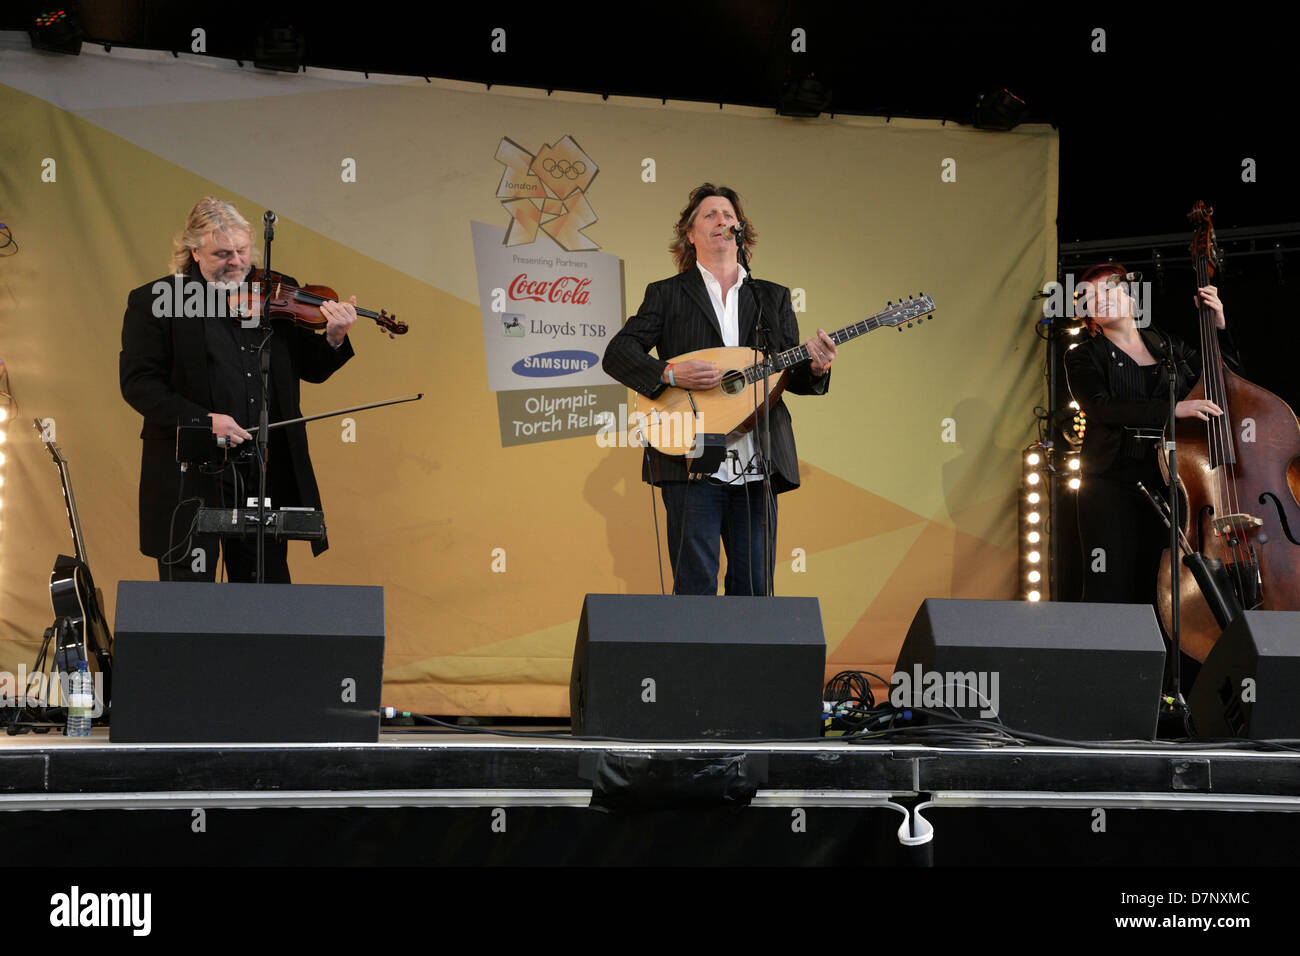 Show of Hands folk music band at the Party to celebrate the arrival of the 2012 Olympic torch in Exeter UK Stock Photo